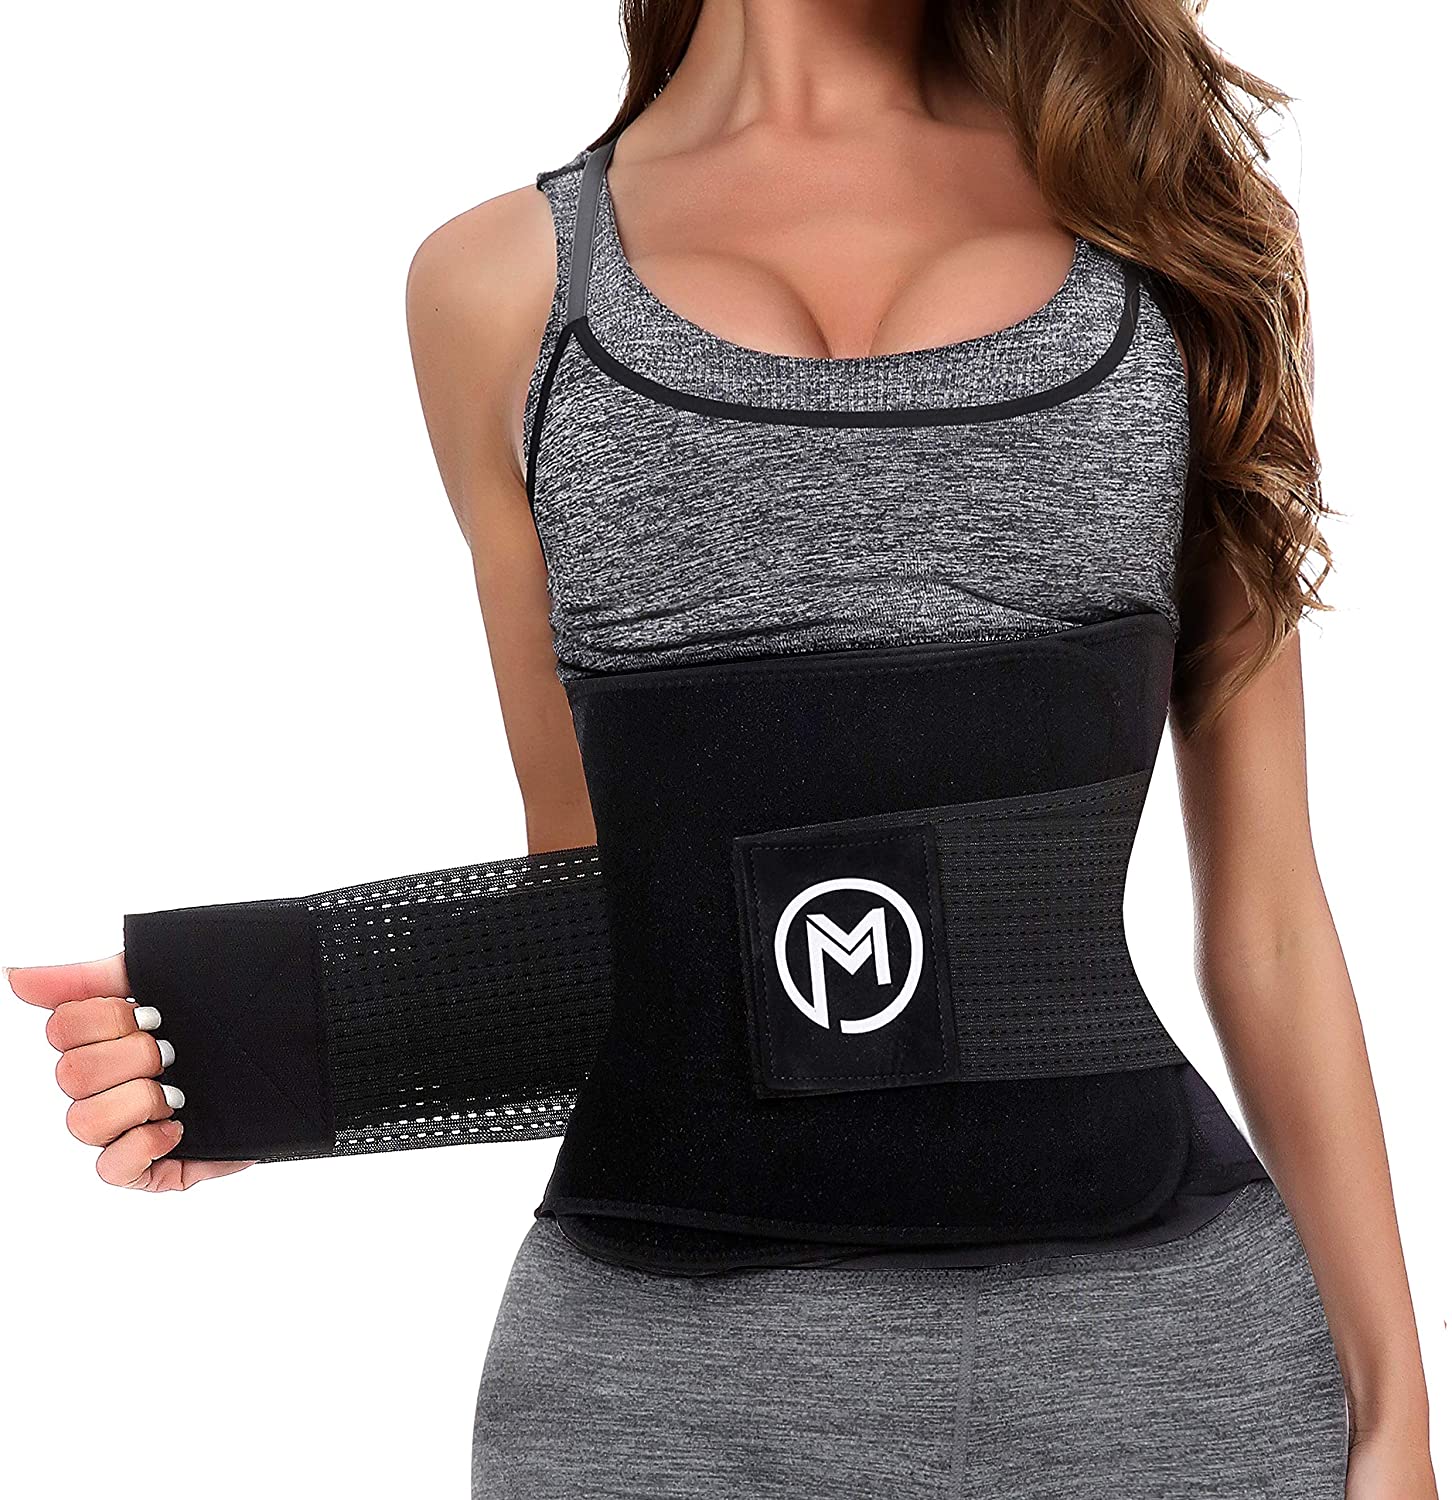 Waist Trainer For Women & Men - Sweat Band Waist Trimmer Belt For A Toned  Look - Reinforced Trim And